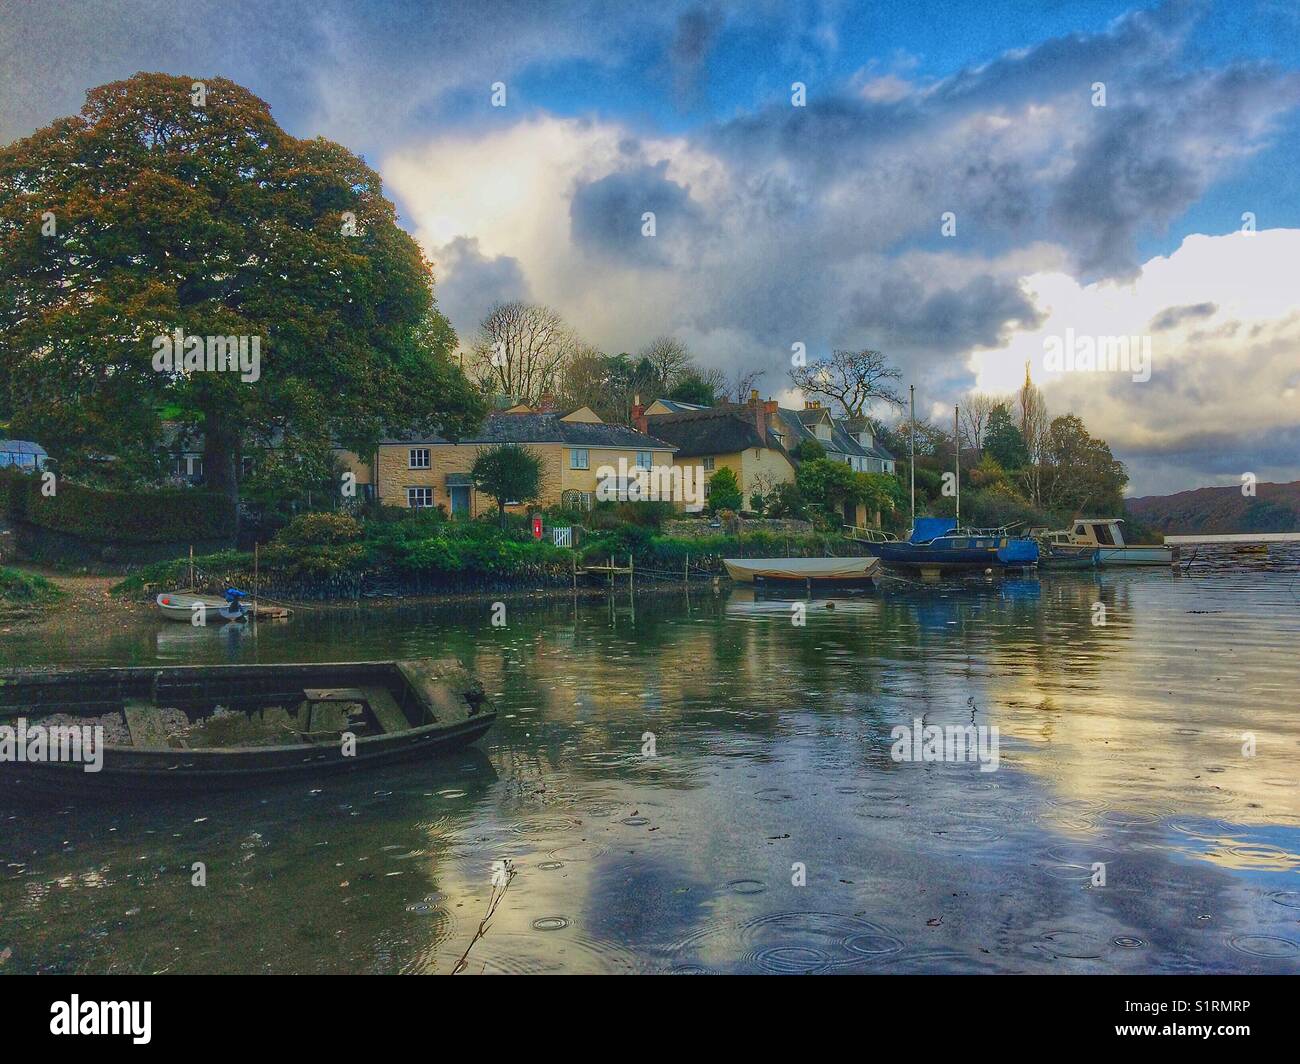 St Clements Truro boats on the river fal Stock Photo